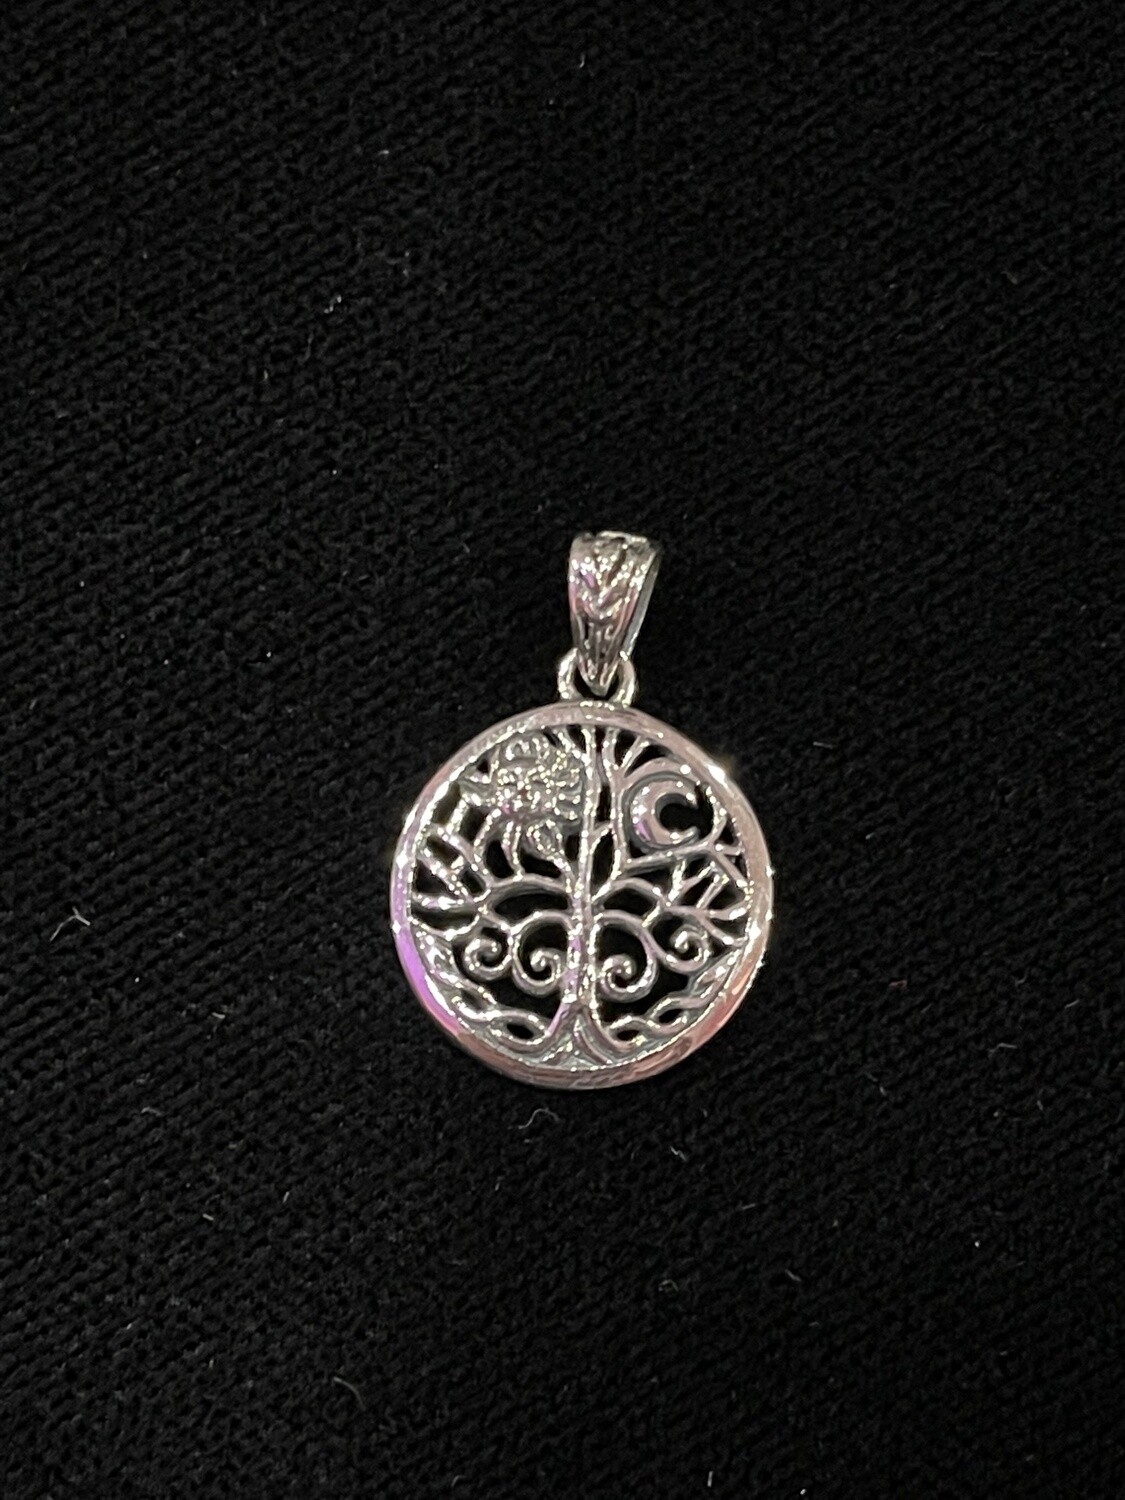 Pagan & Wicca Tree of Life ~ Sterling Silver Jewelry Pendant